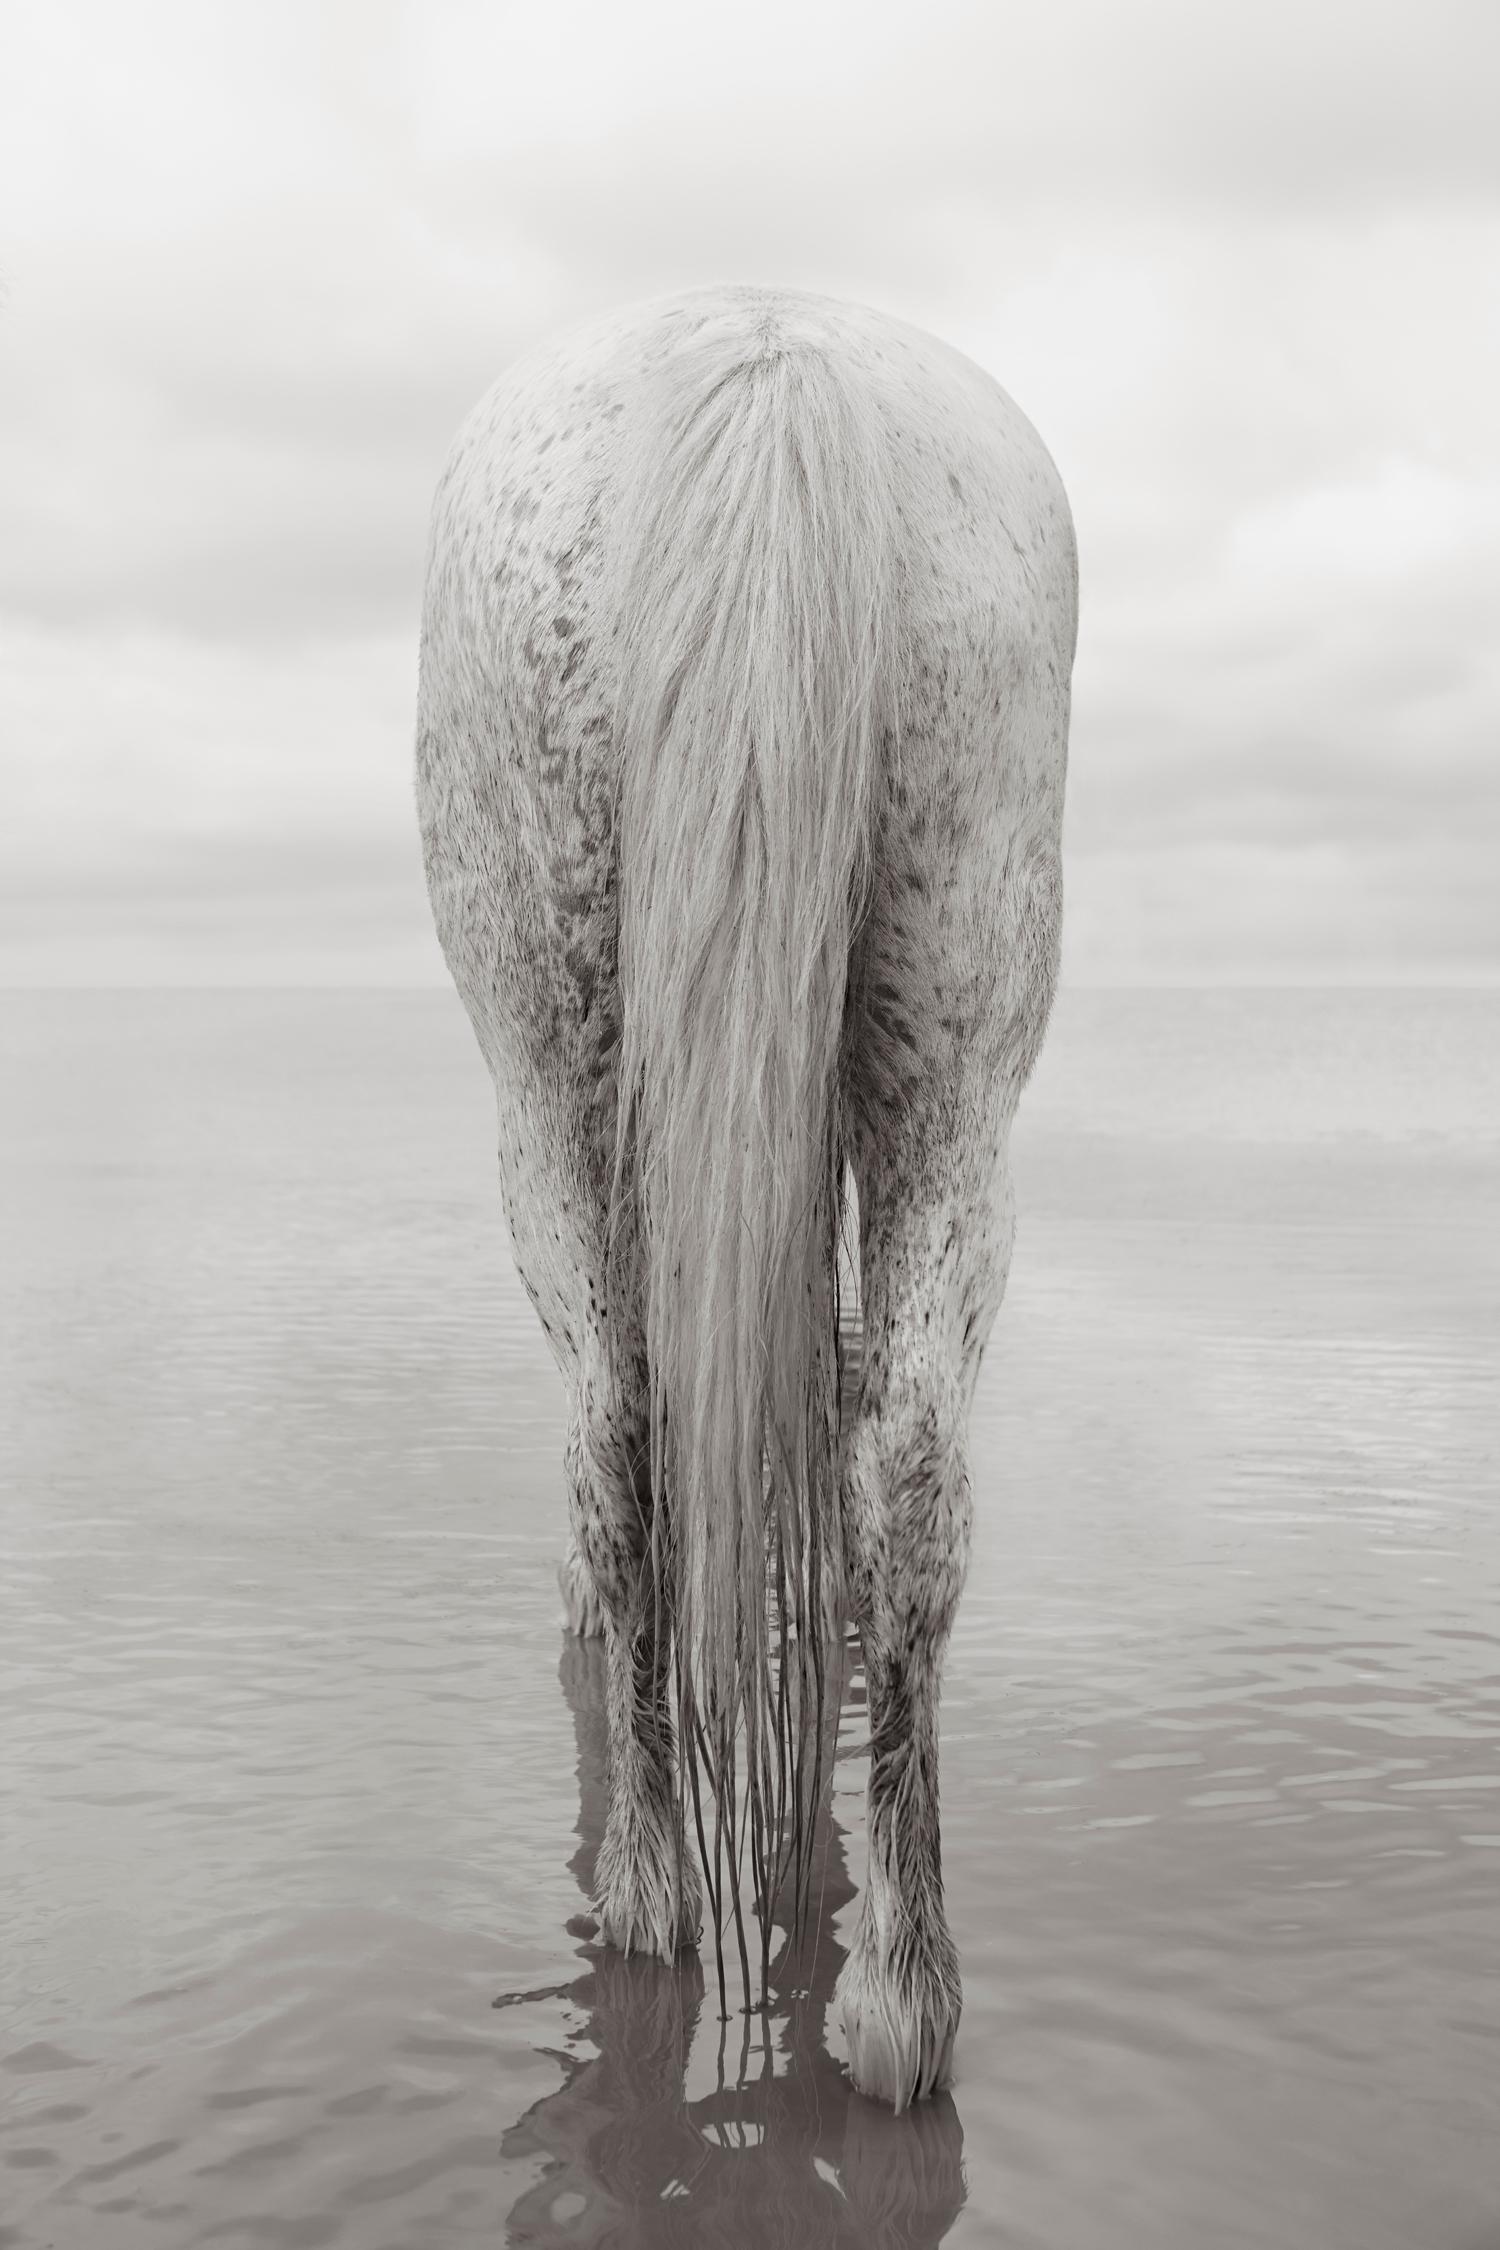 Drew Doggett Black and White Photograph - Portrait of an All-White Horse in Camargue, France, Vertical, Ethereal